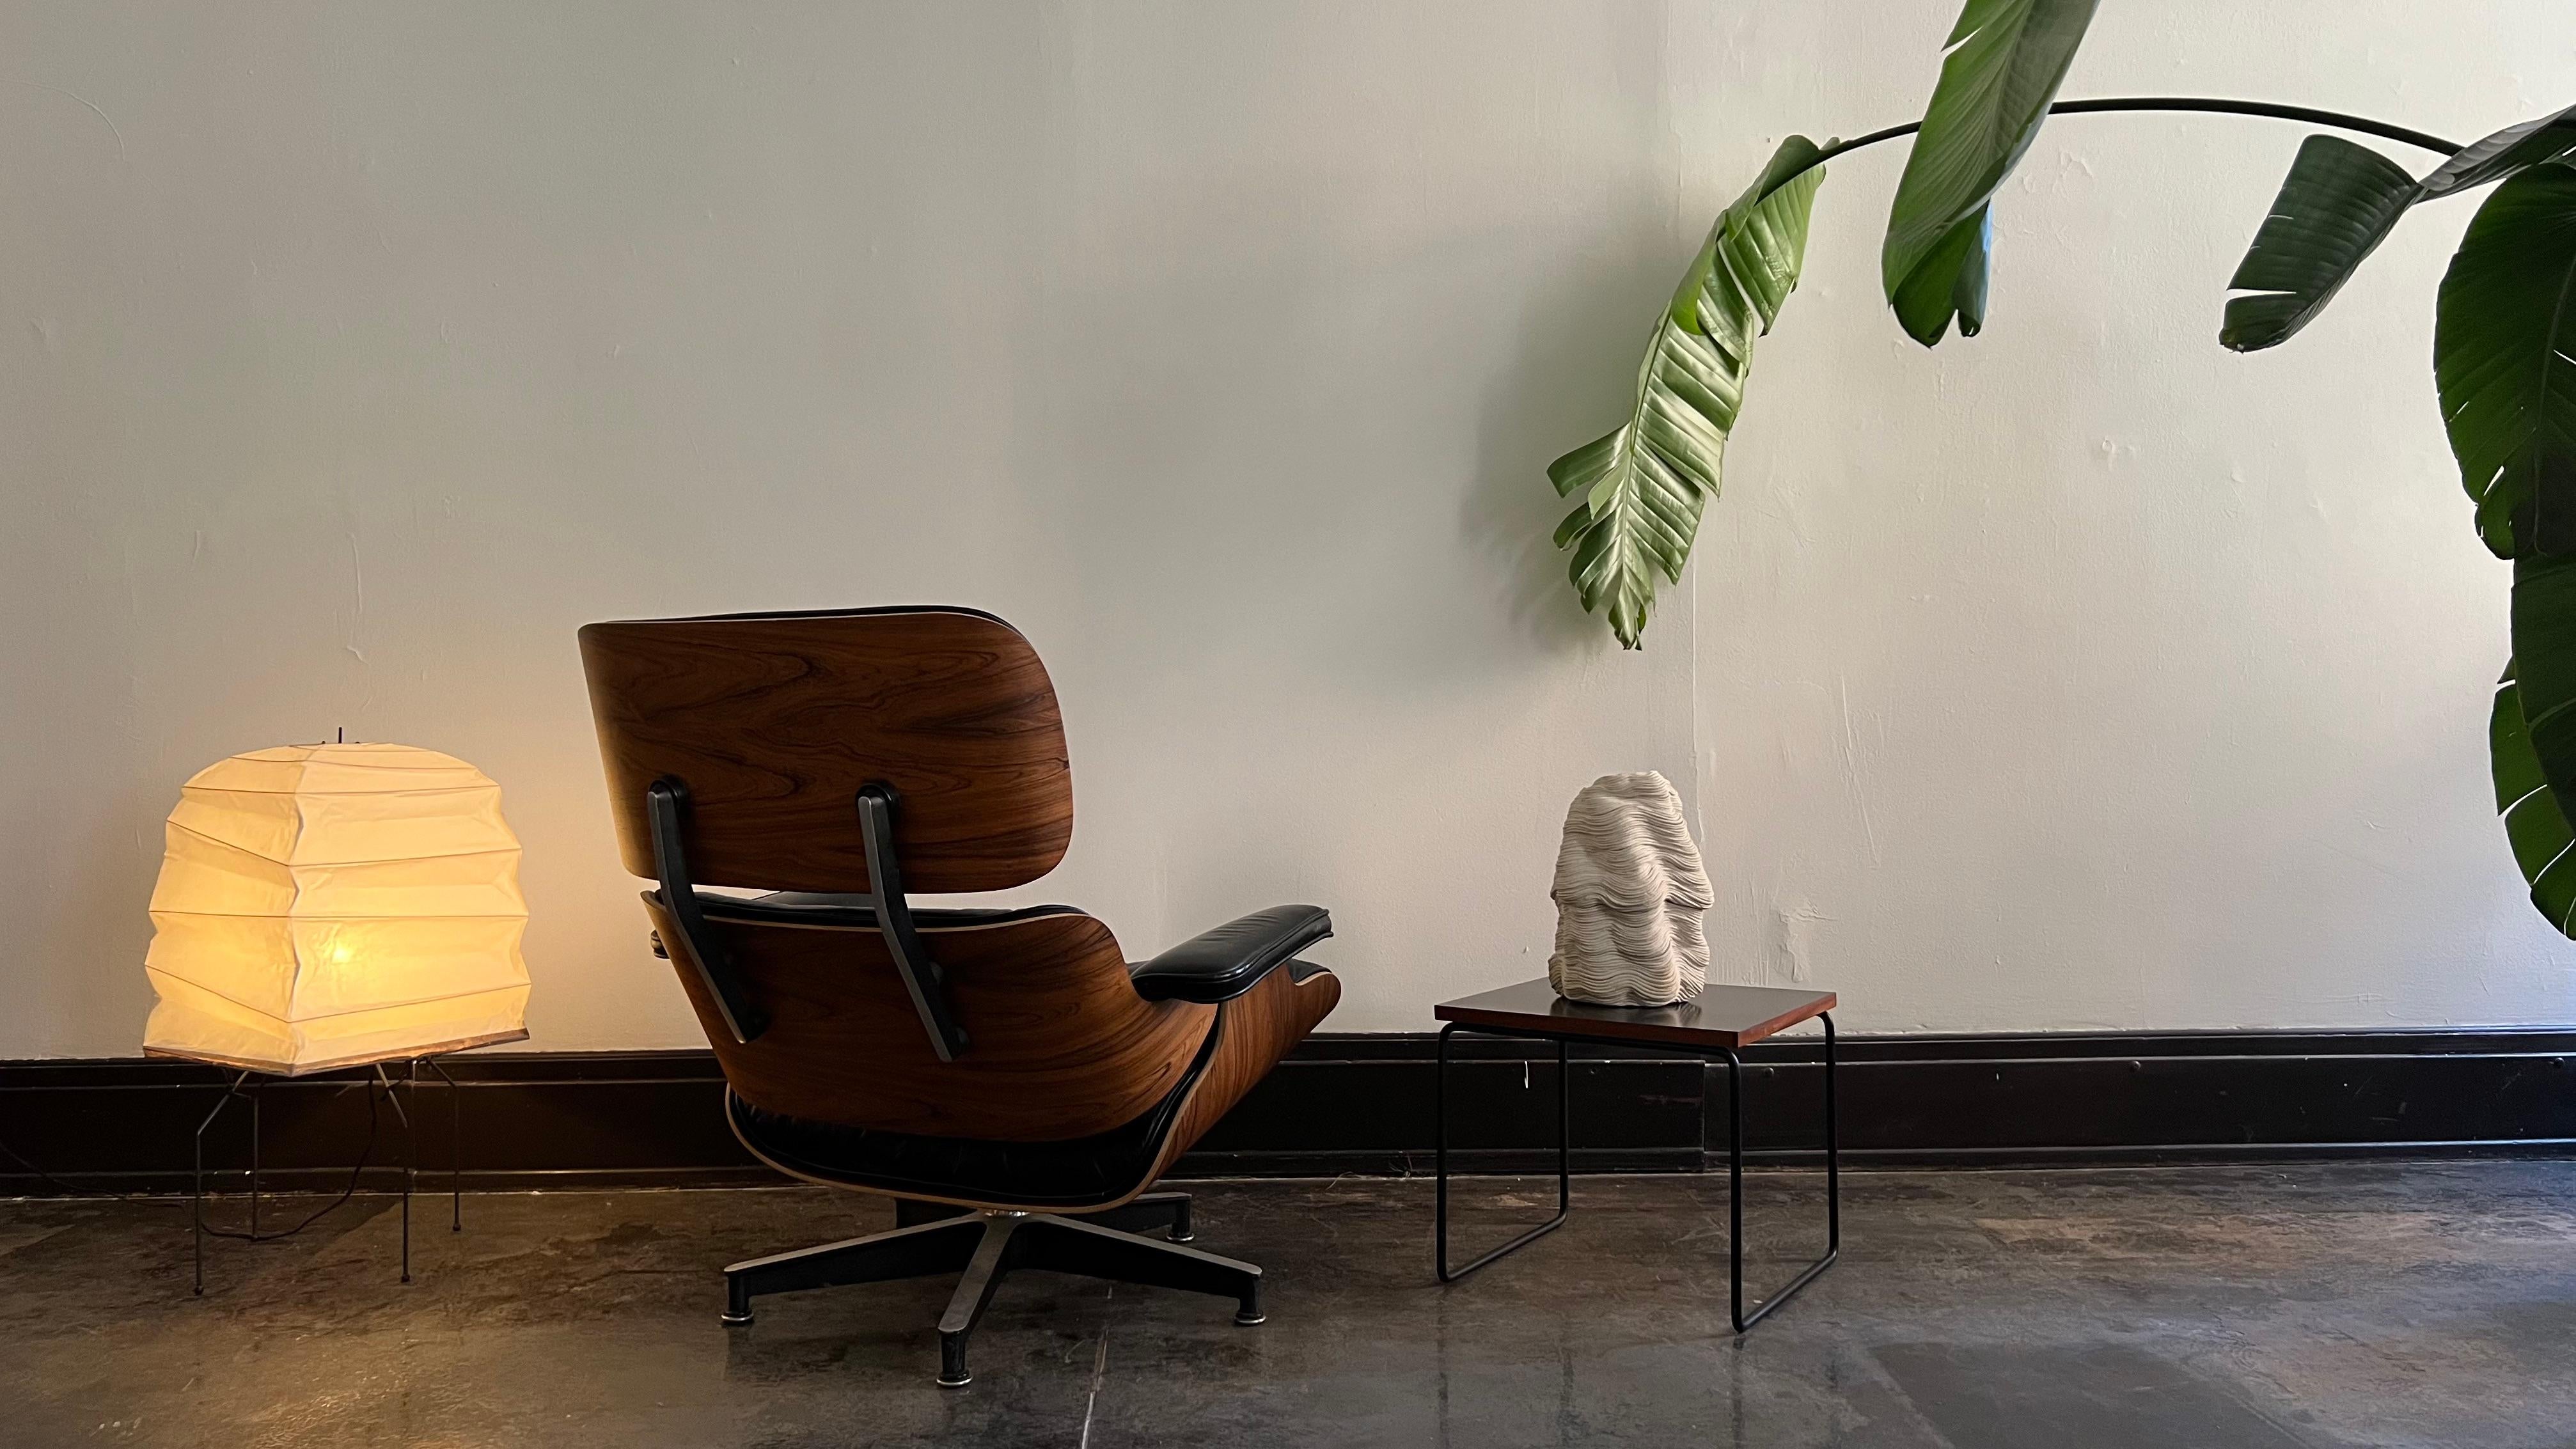 About as iconic as they come. The Eames 670, more commonly known as the Eames Lounge Chair was the brain child of the modernist masters Ray and Charles Eames. Conceived in 1956, it's only undergone a handful of iterations. This example is a second